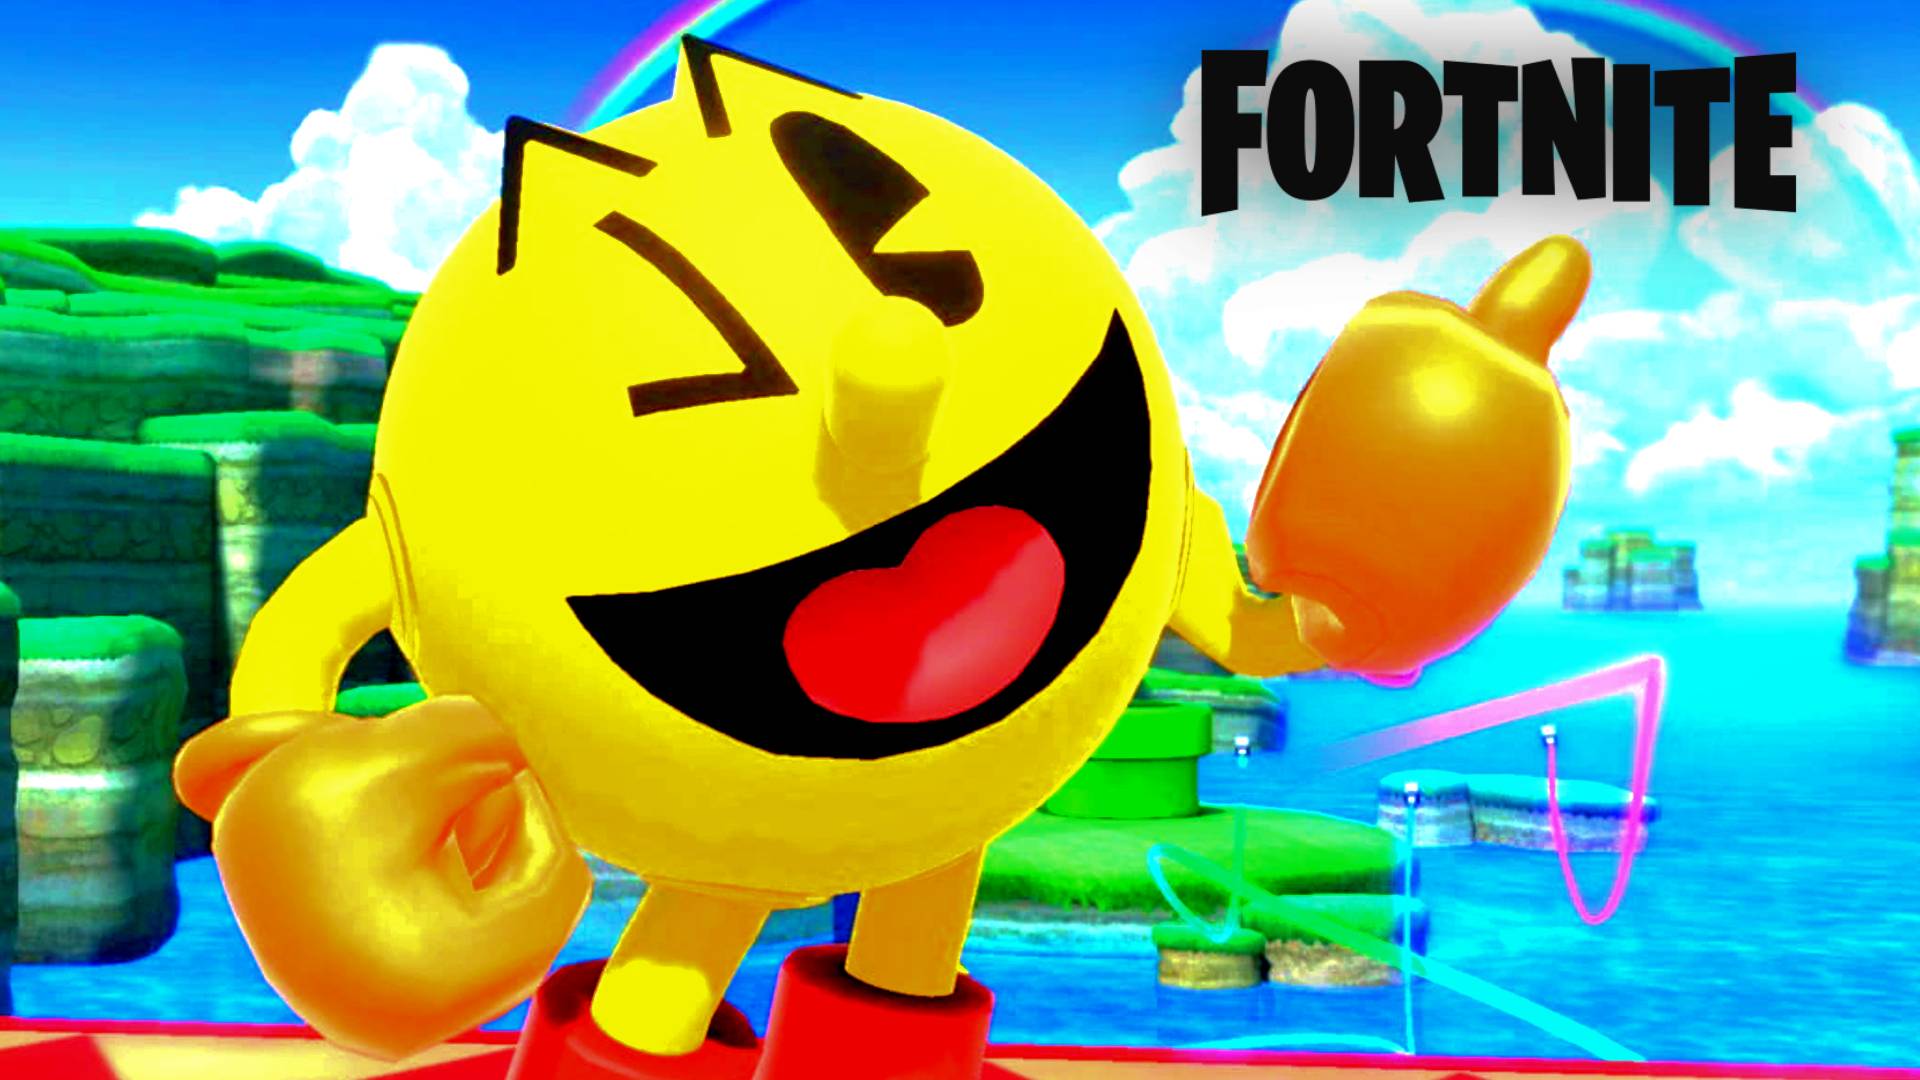 Fortnite Pac-Man crossover coming to battle royale next month | The Loadout